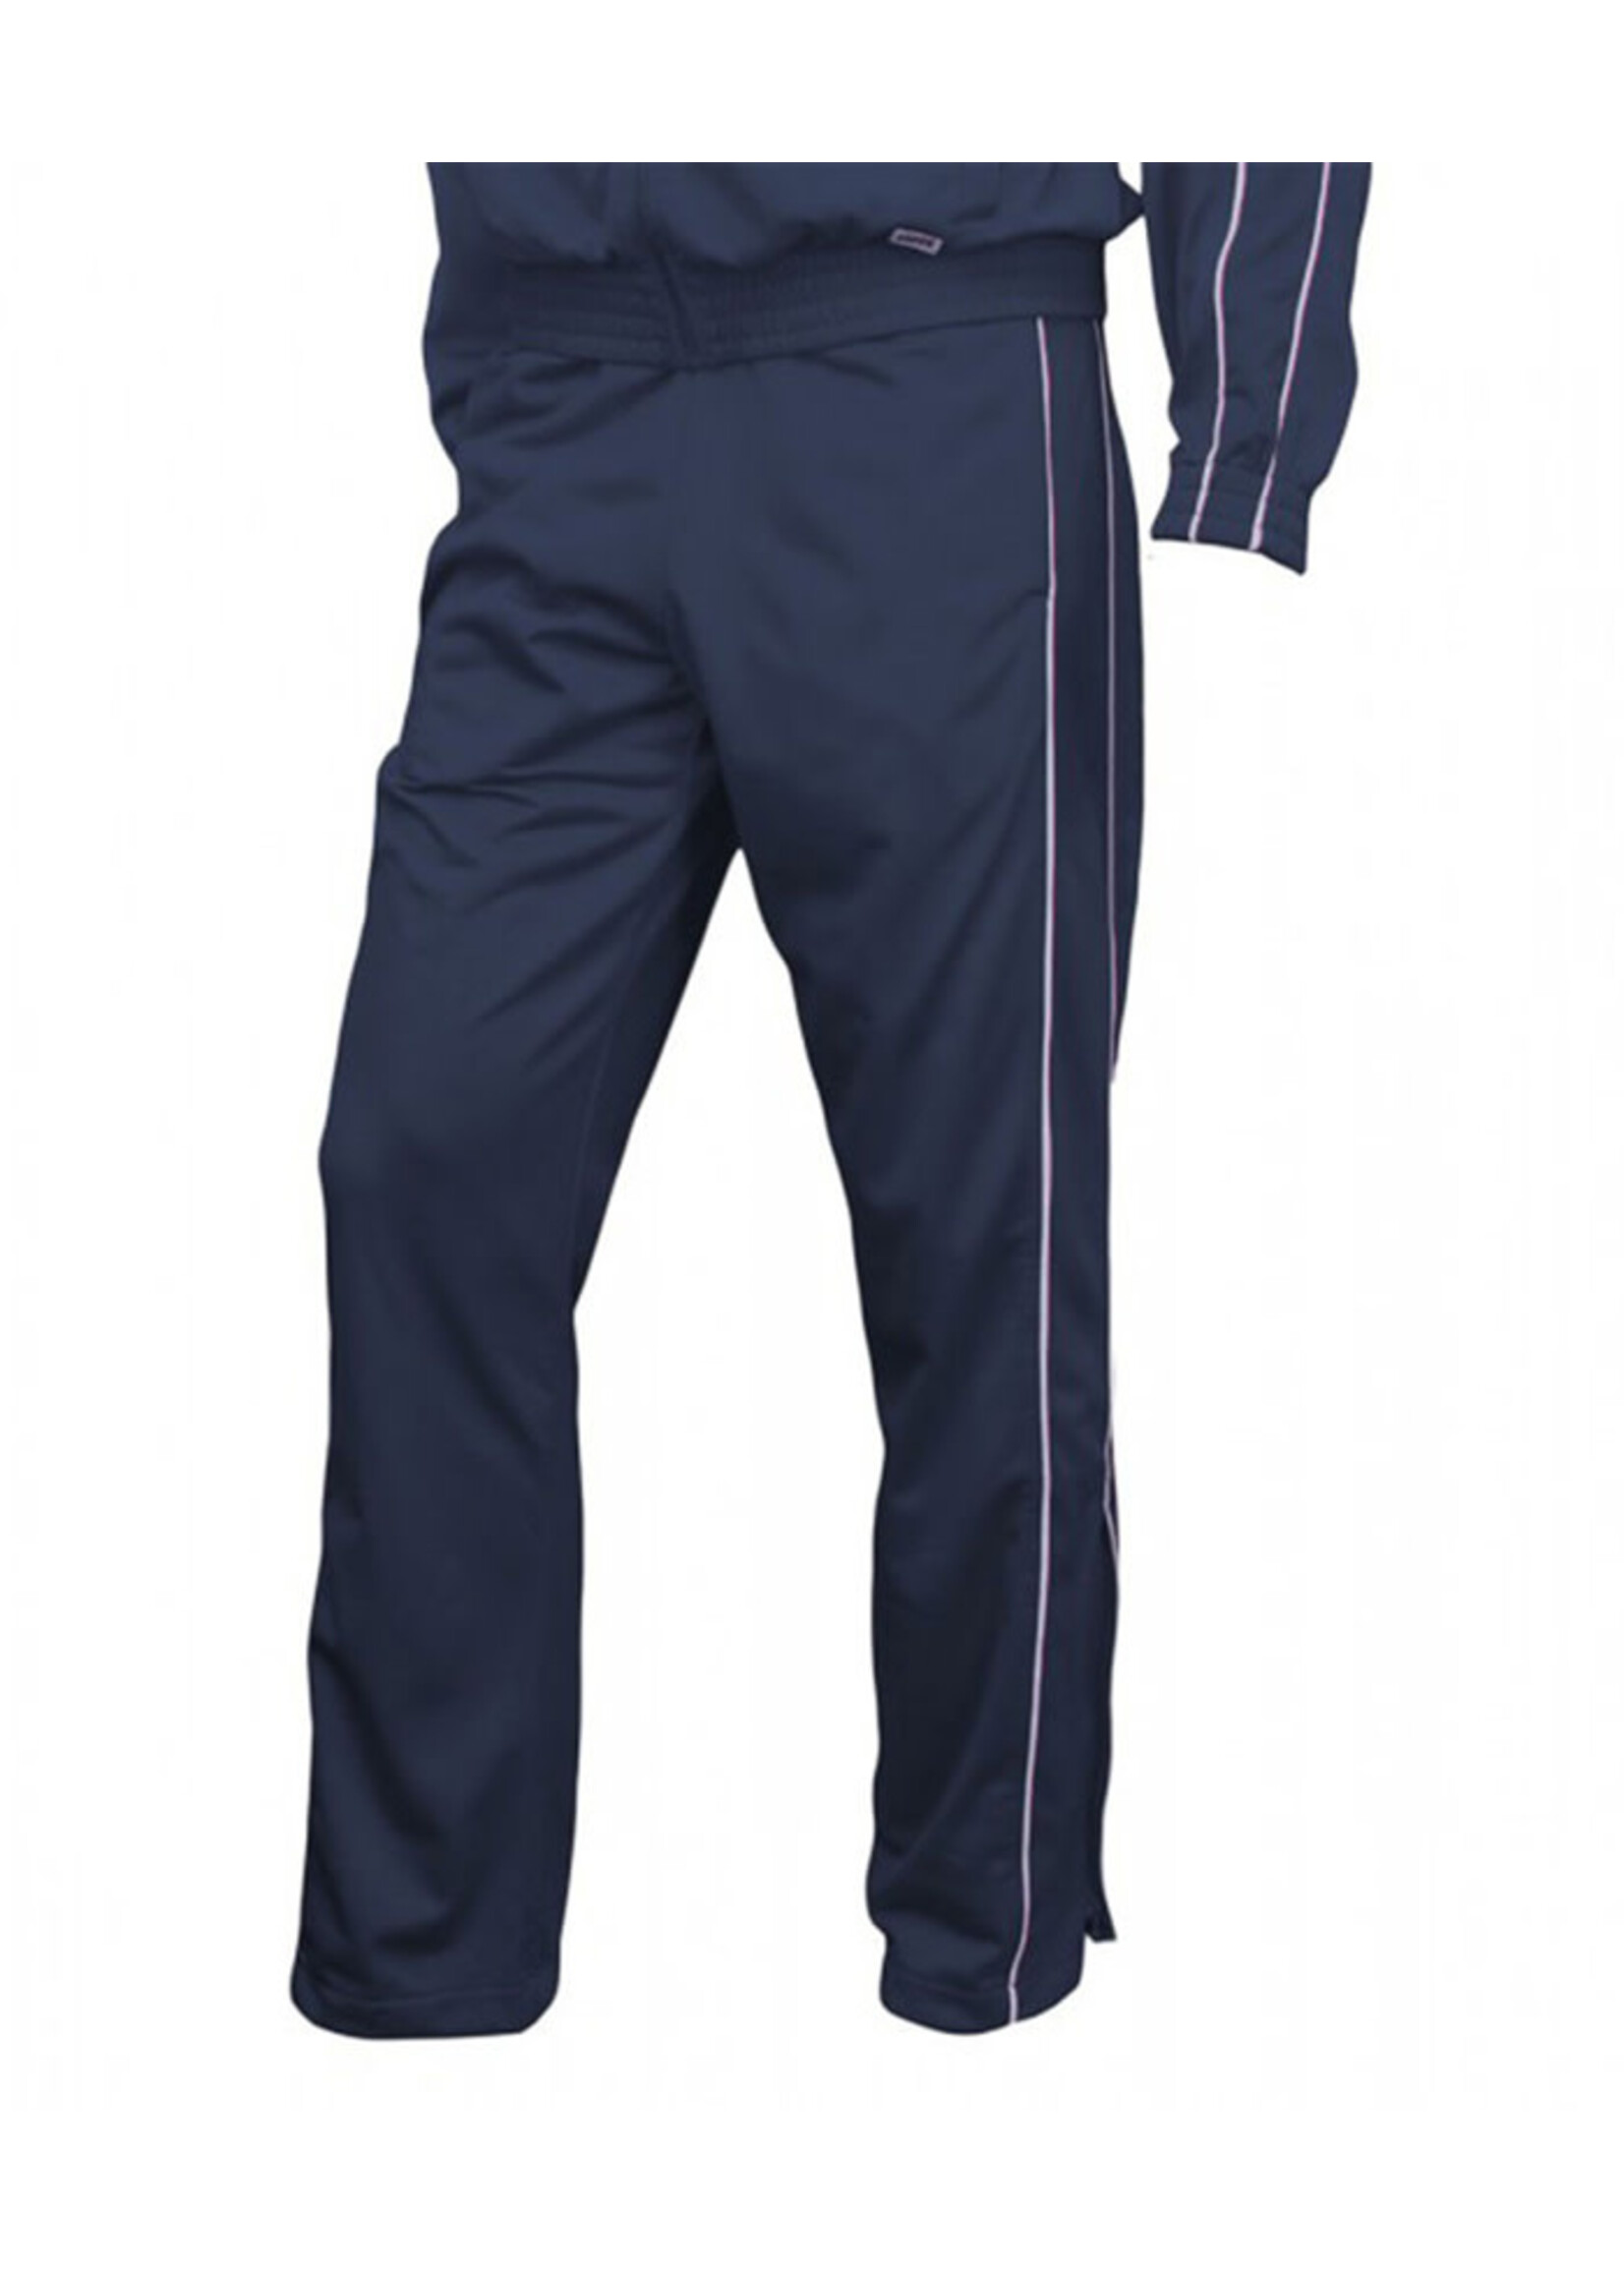 SBCA Navy Tricot Warm Up Pants (Boys Only)